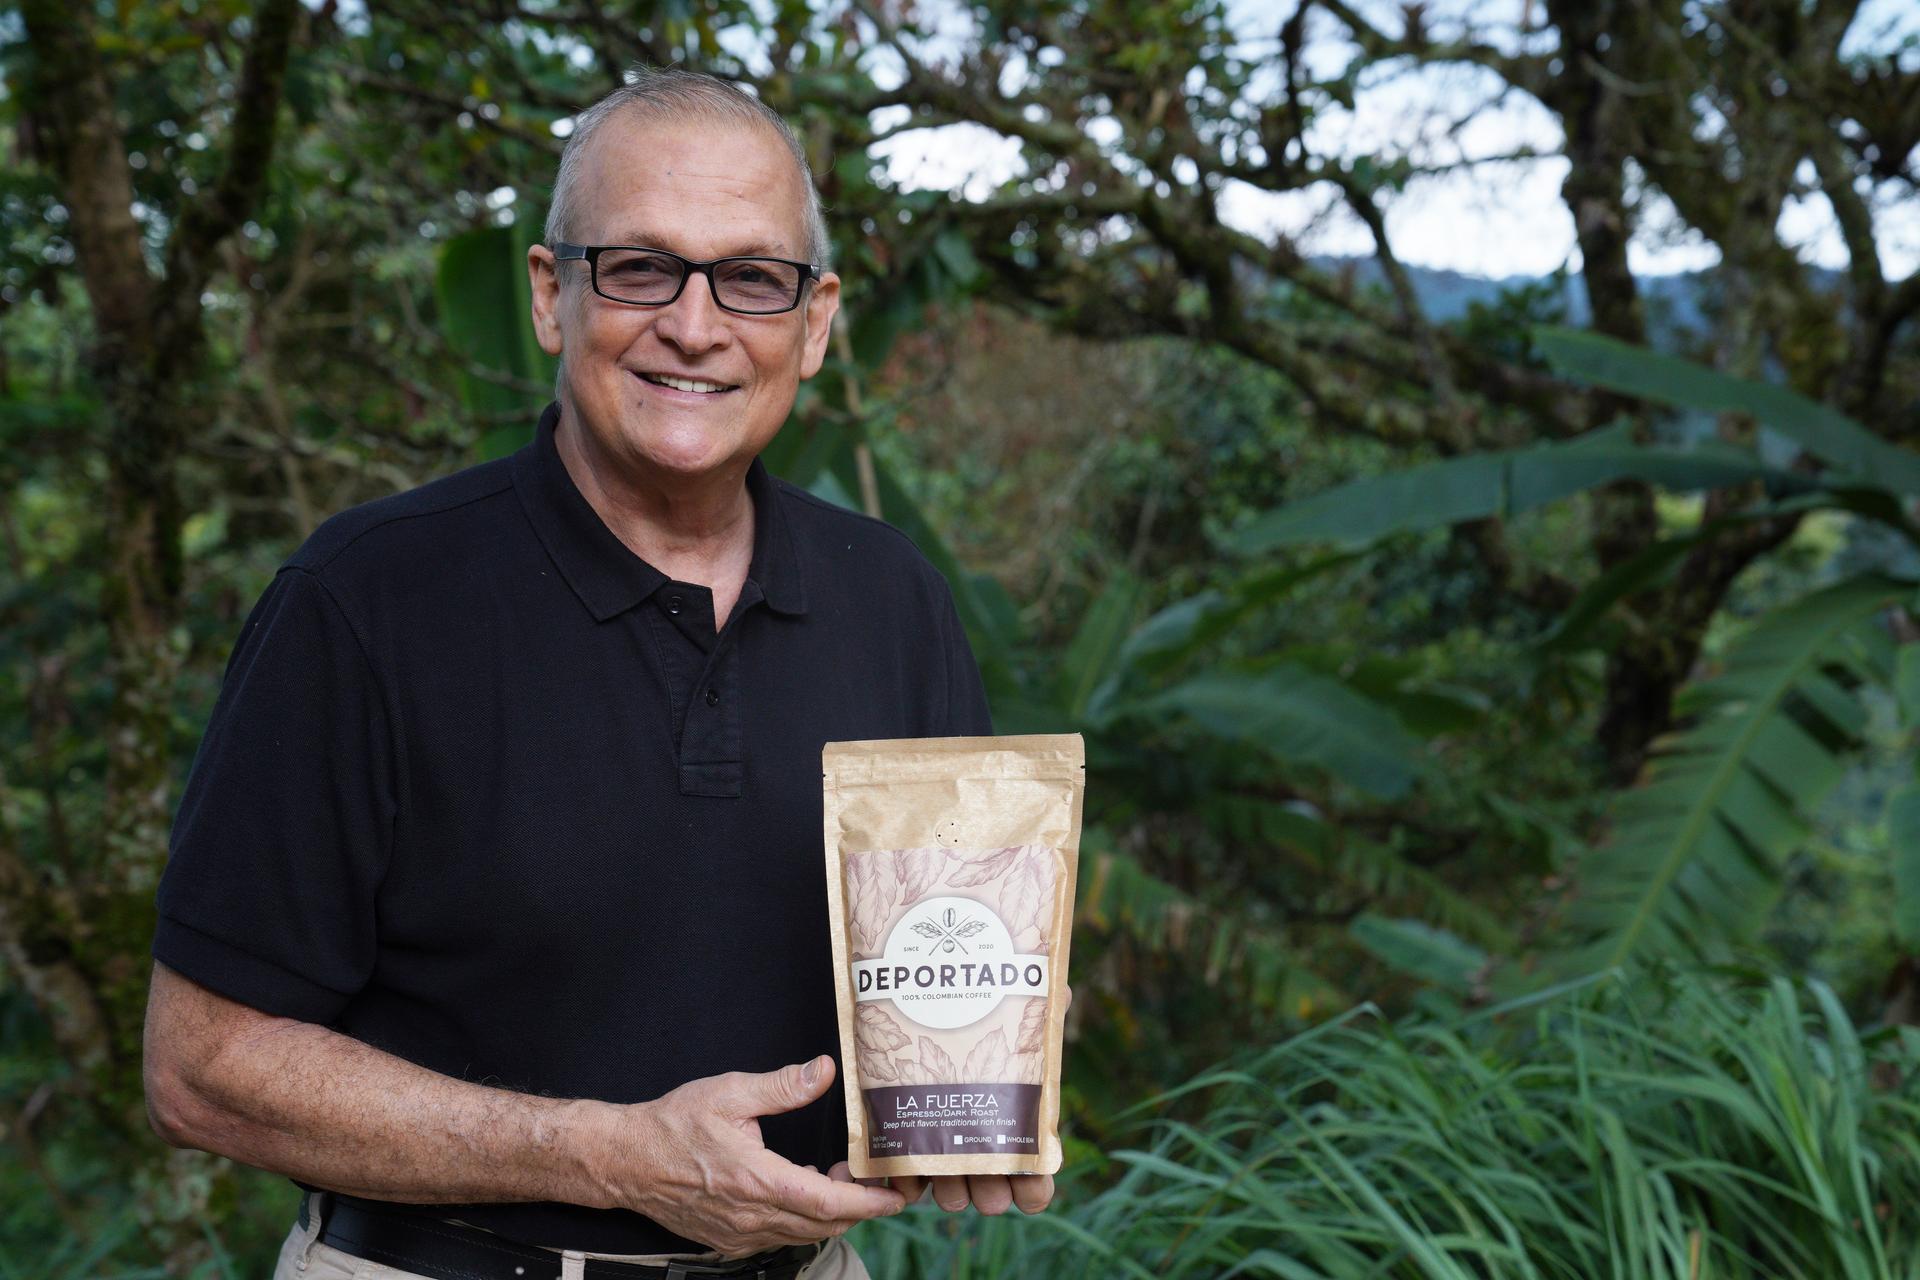 In April, Deportado Coffee exported its first batch of coffee to the United States. Mauricio Zuñiga hopes the brand will spark conversations on immigration reform.